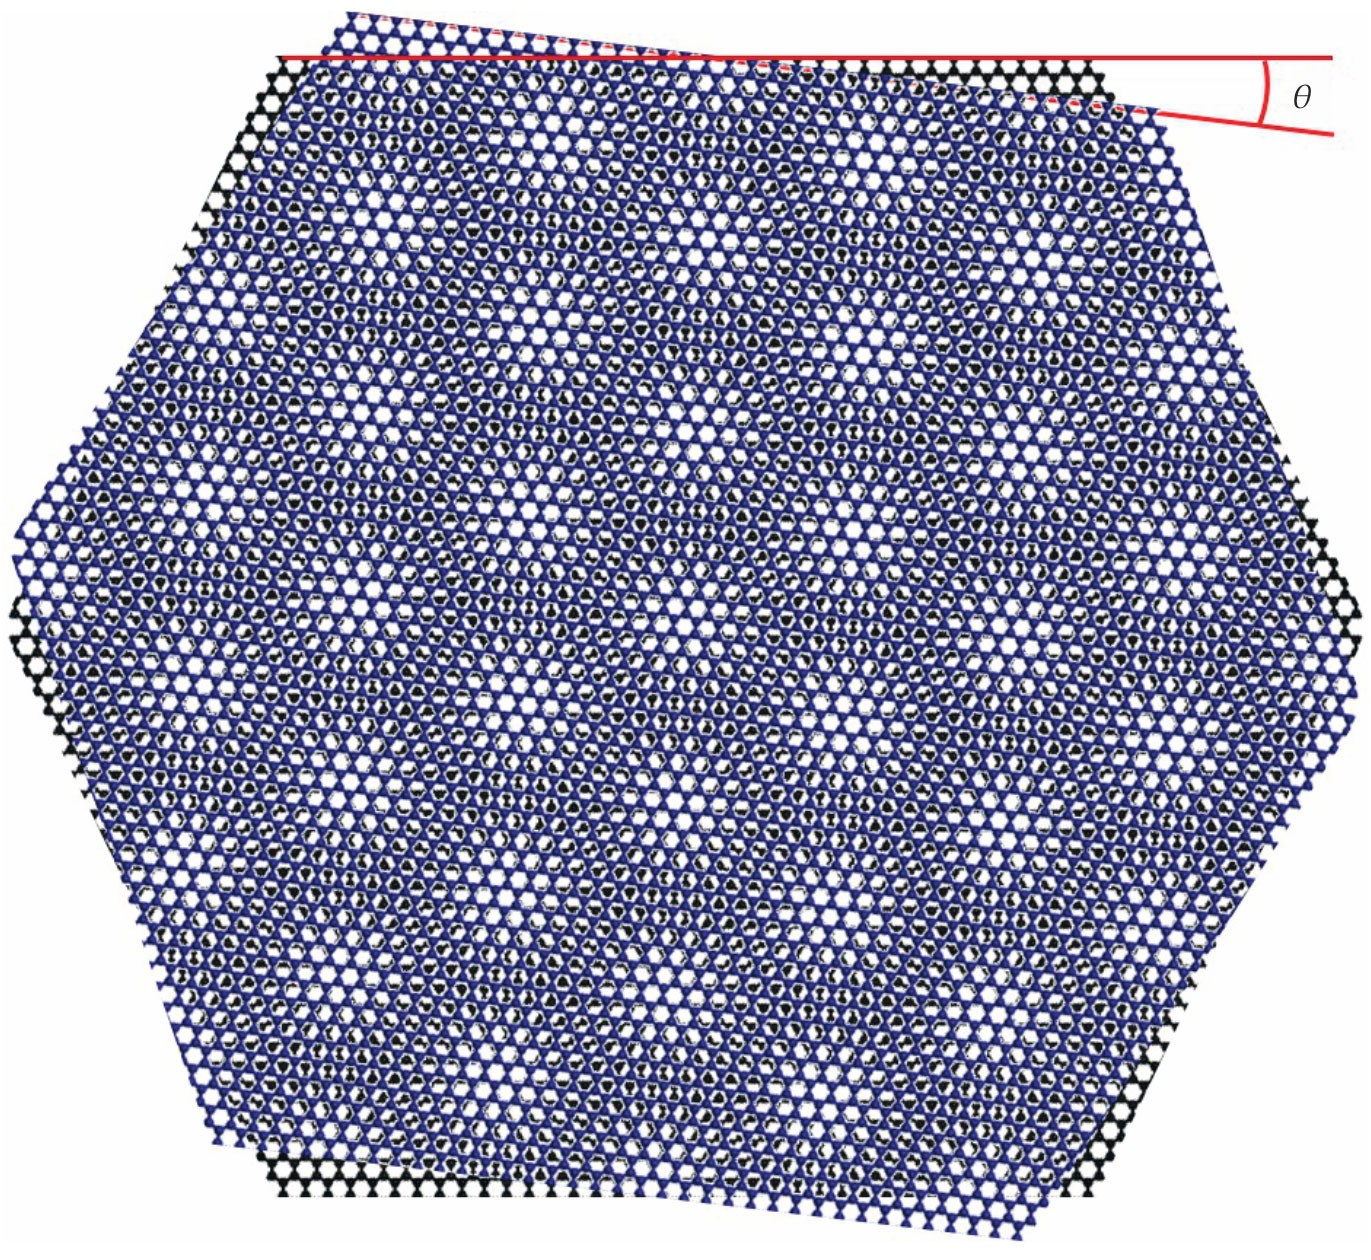 Twisted bilayer graphene, assembled from two layers of graphene with a relative twist.